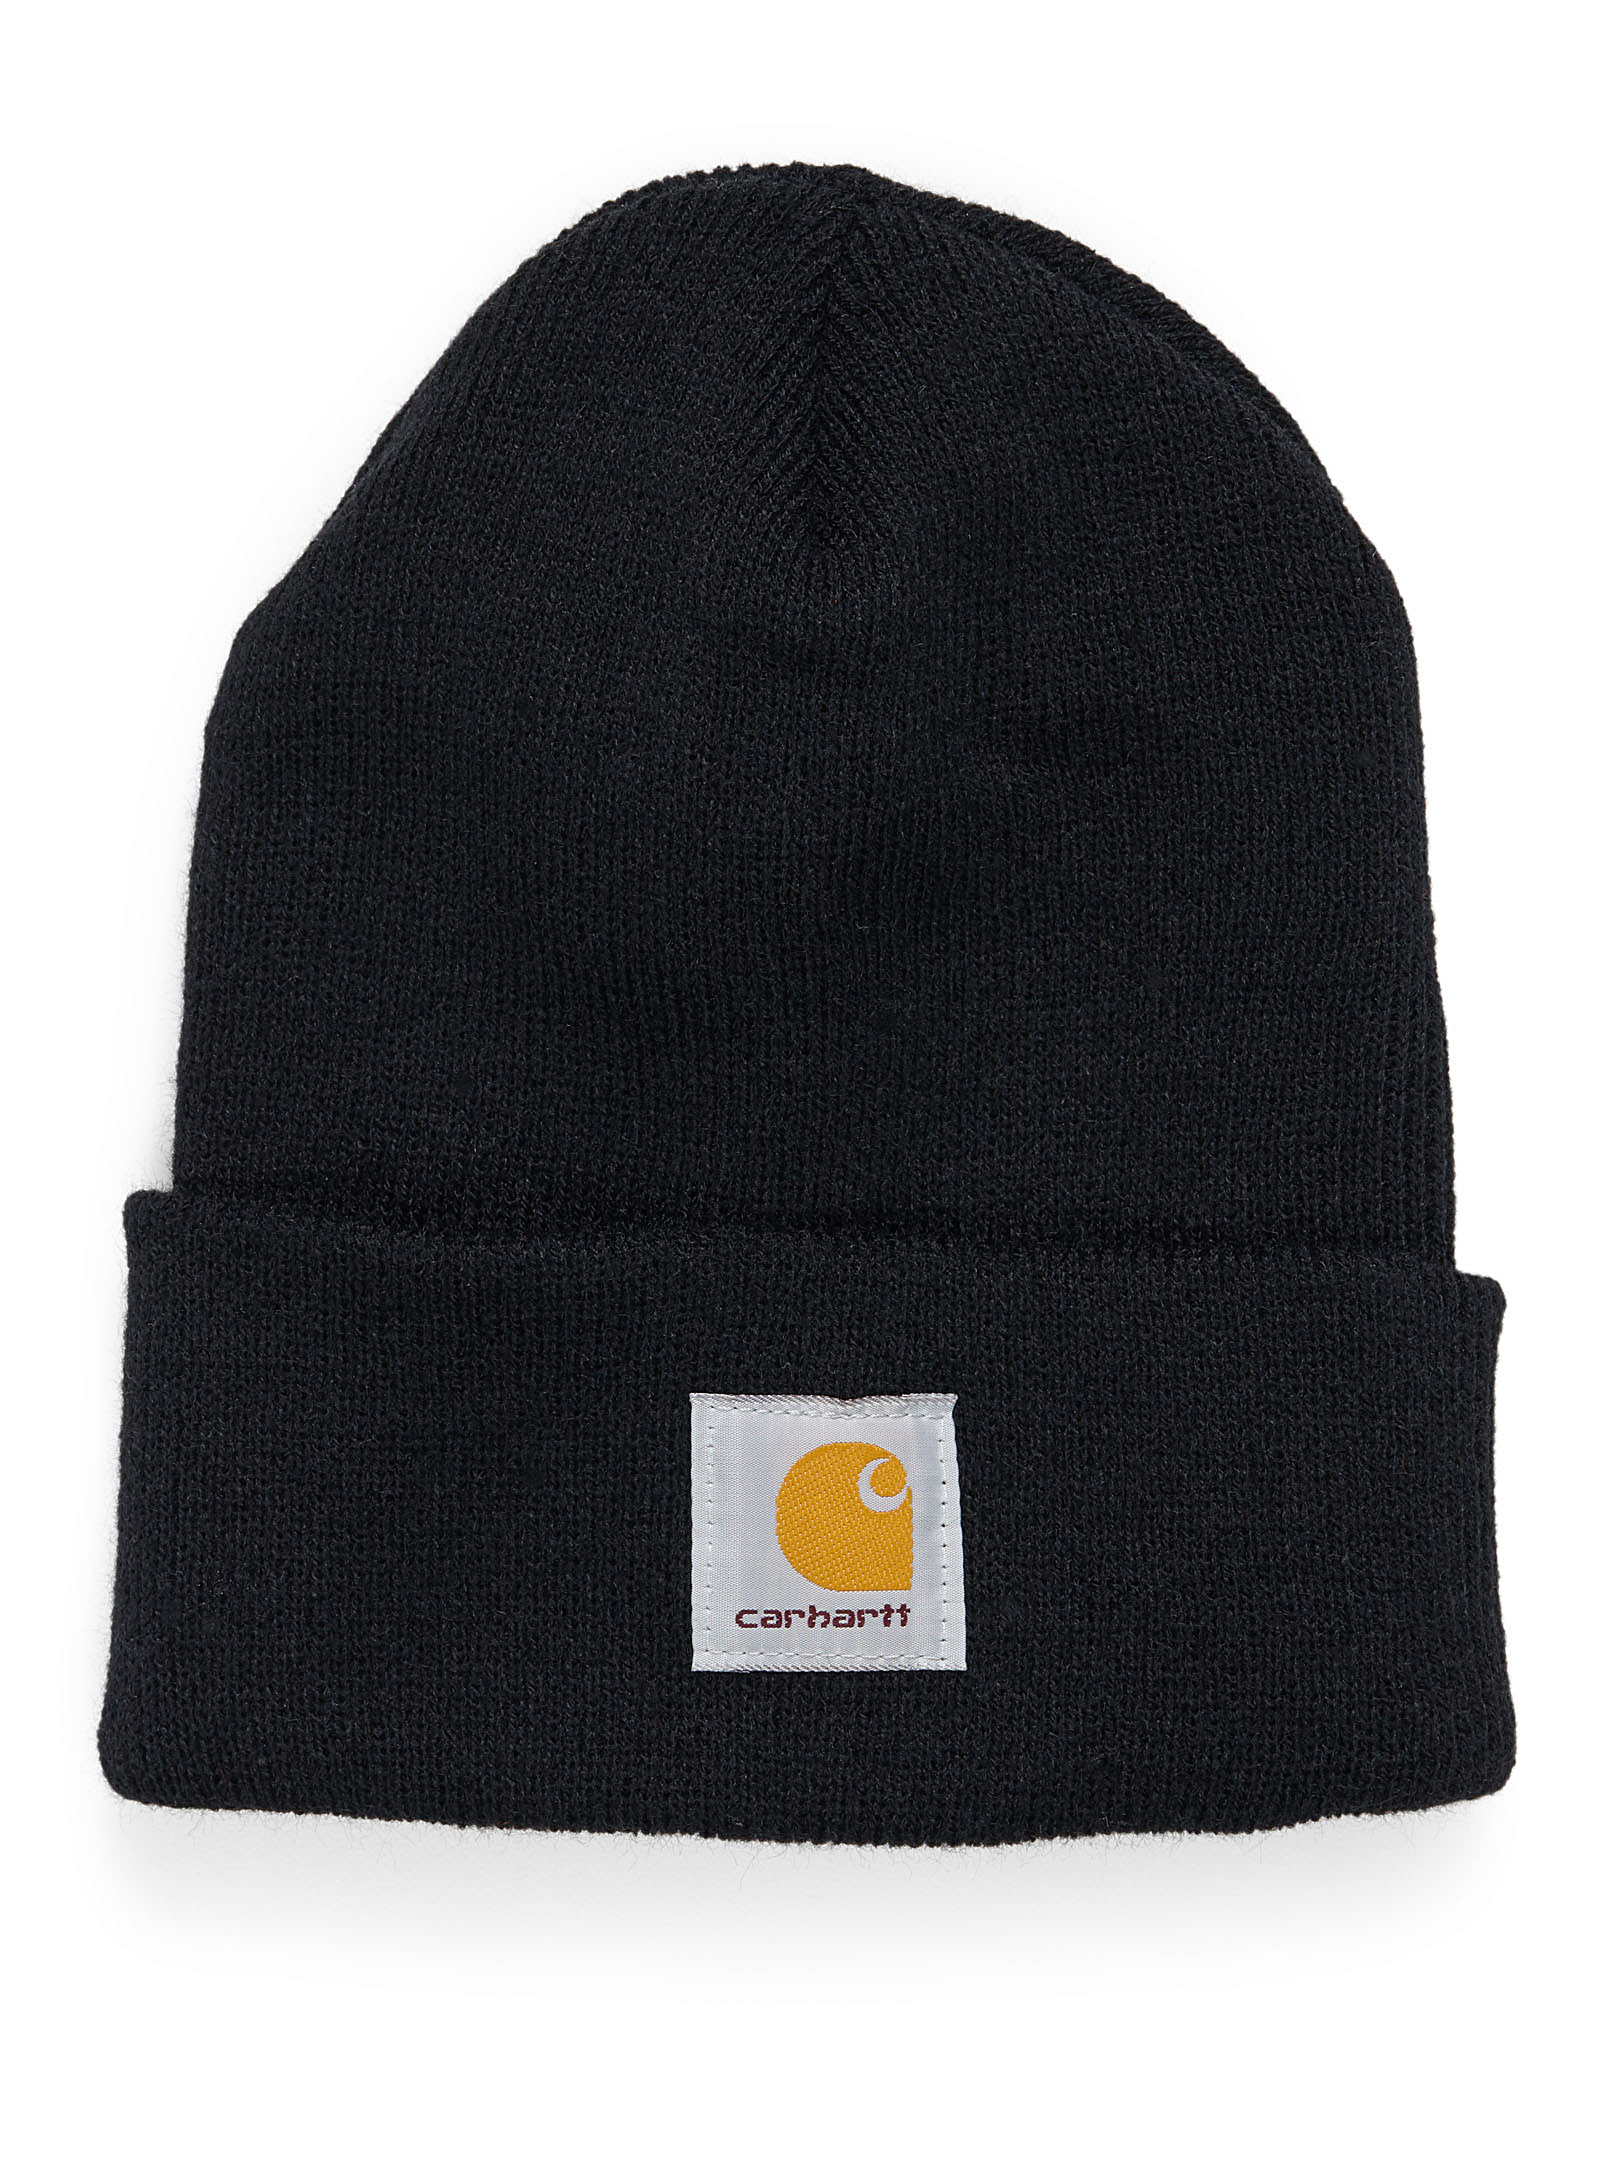 Carhartt Ribbed Worker Tuque In Black